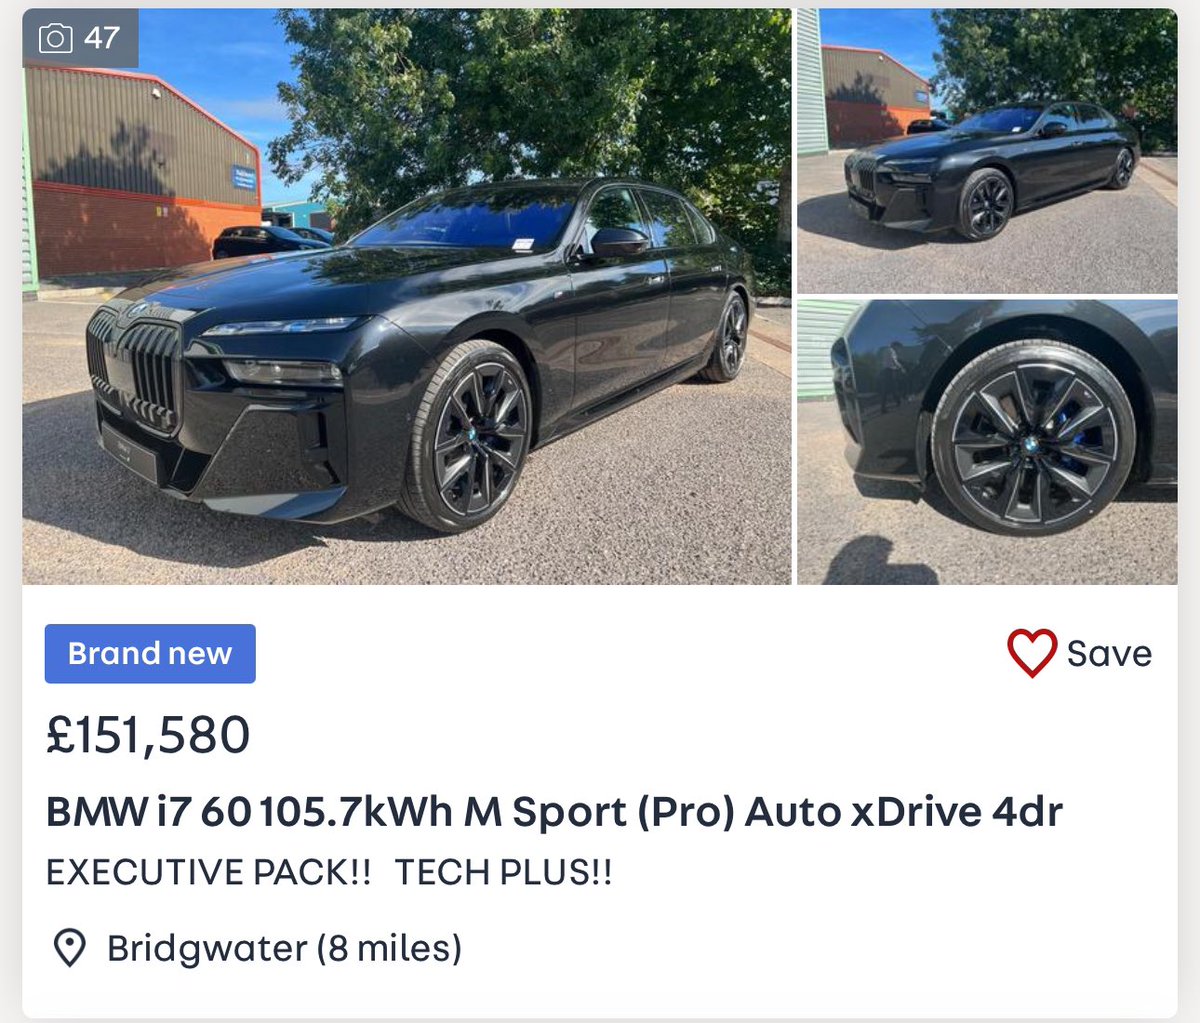 Any lottery winners out there who can’t get their hands on a £400k #rollsroycespectre here’s an absolute bargain for you at only £150,000 ! #bmwi7 autotrader.co.uk/car-details/20…